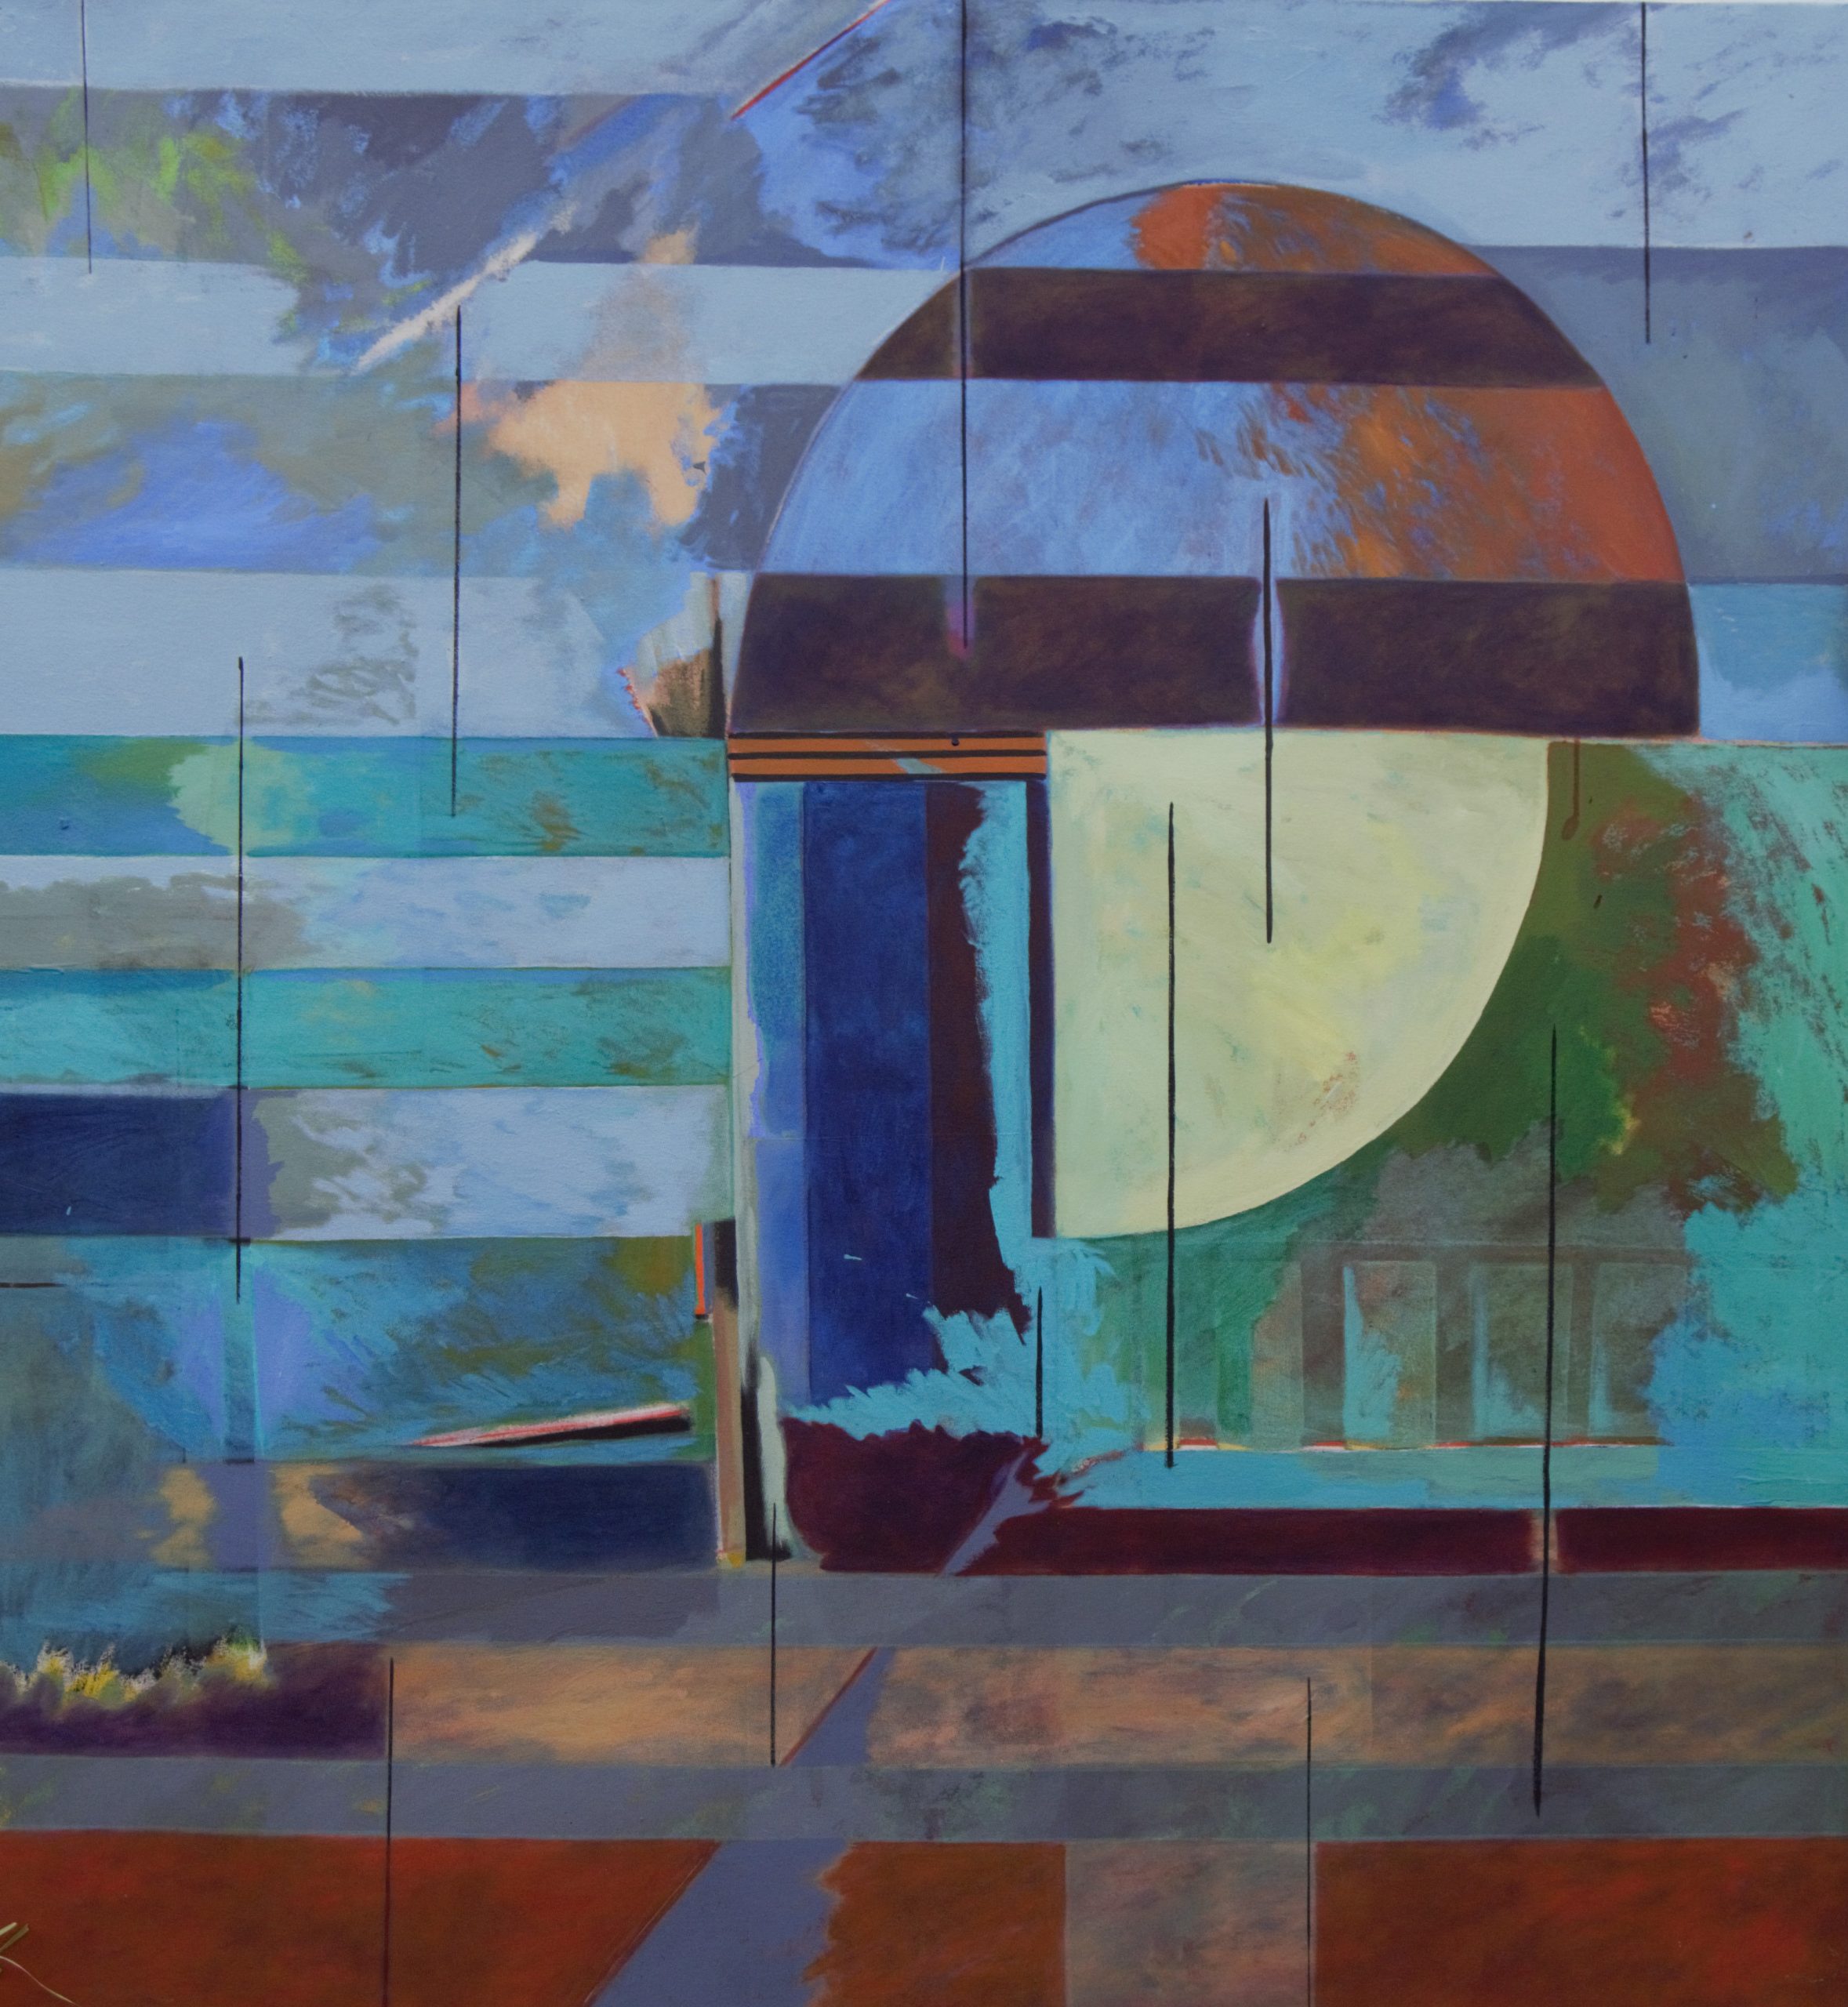 Peter Rhodes, Trajectory, 2010, 149cm x 163 cm, Acrylic on canvas at Pie Factory Margate